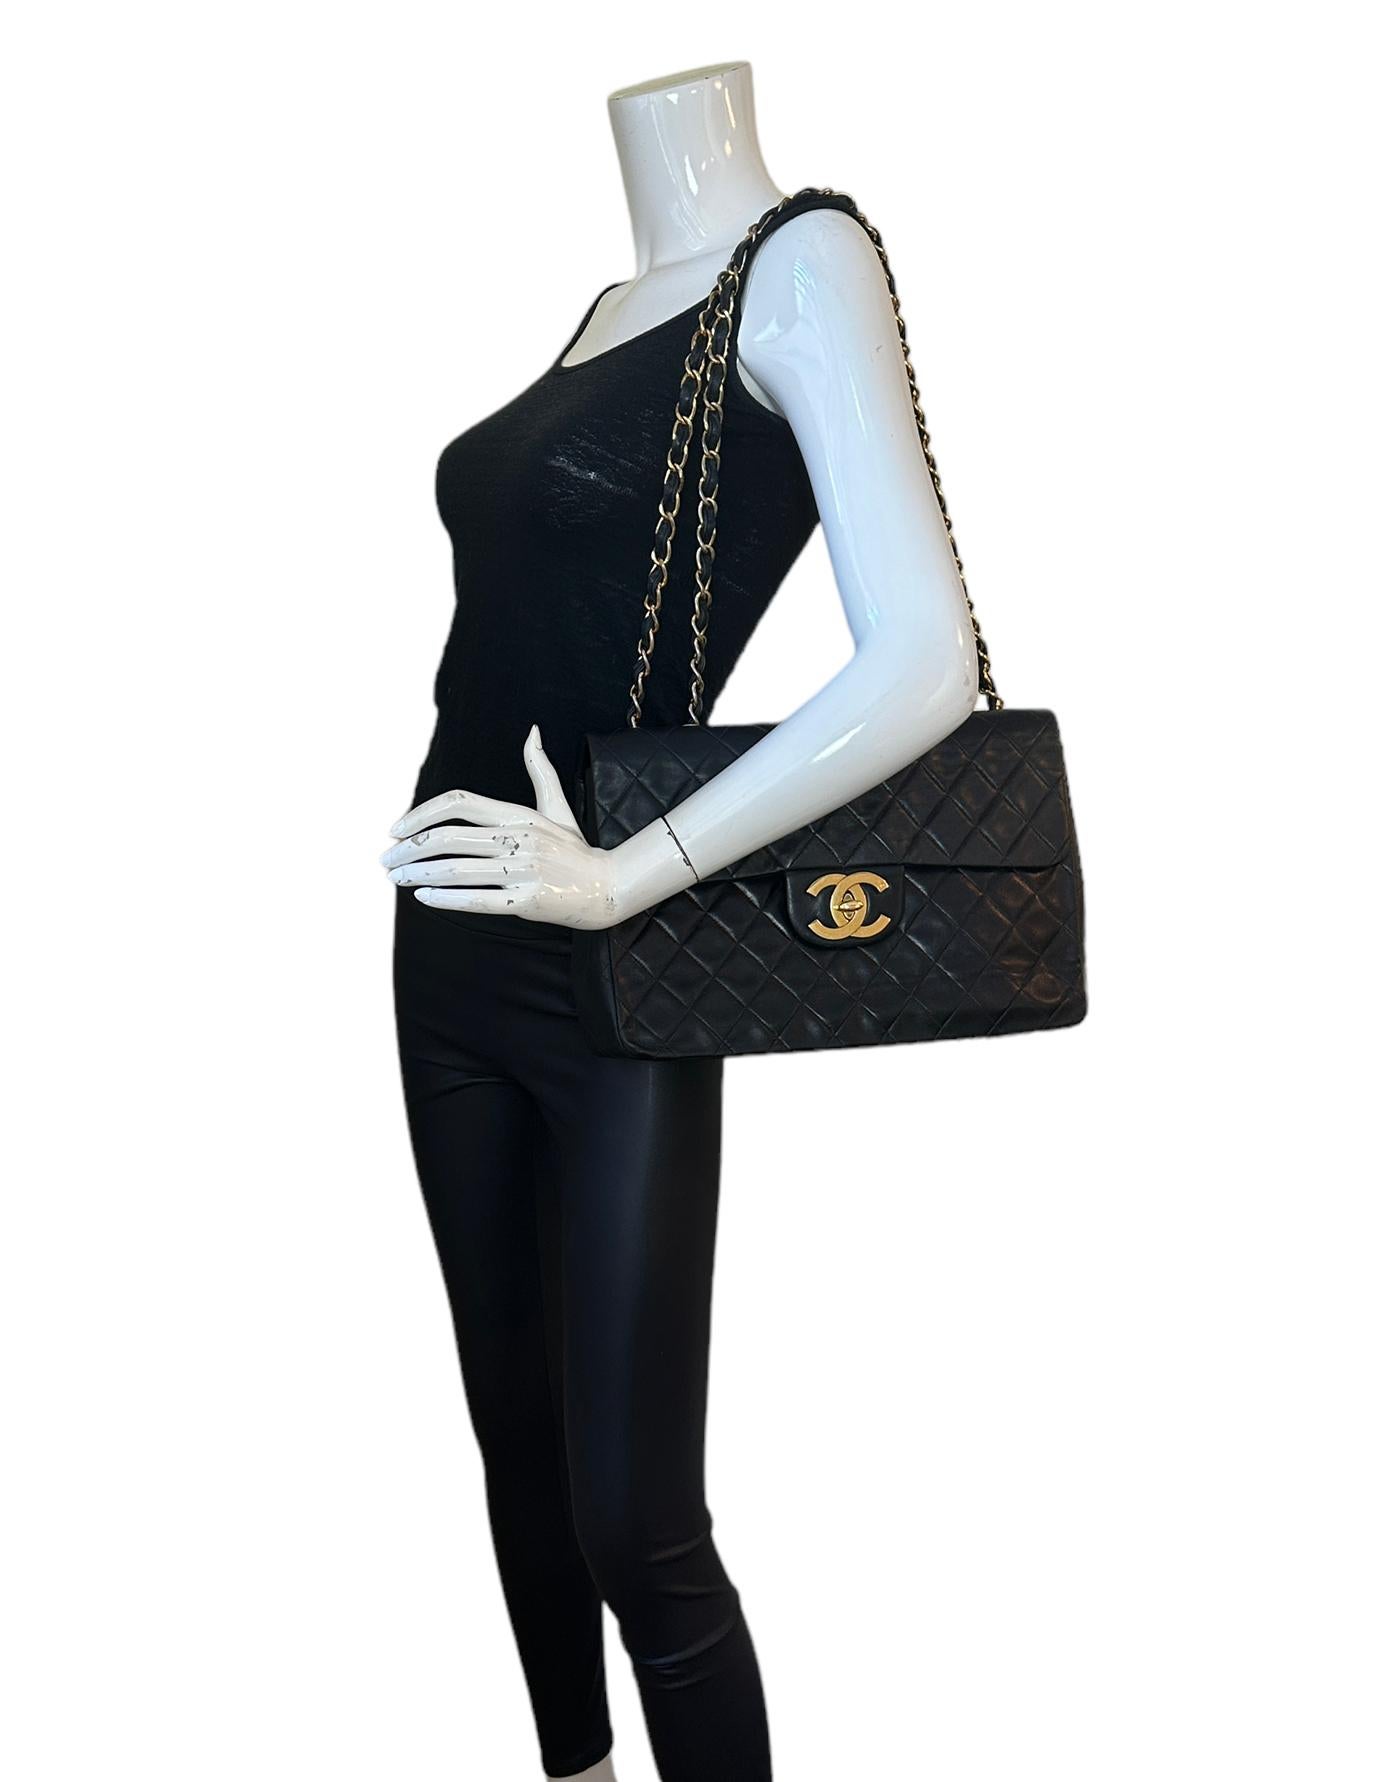 Chanel Vintage 1990s Black Lambskin Leather XL Jumbo Flap Bag 

Made In:
Year of Production: 1996-1997
Color: Black
Hardware: Gold plated
Materials: Lambskin leather
Lining: Burgundy smooth leather
Closure/Opening: Flap top with CC